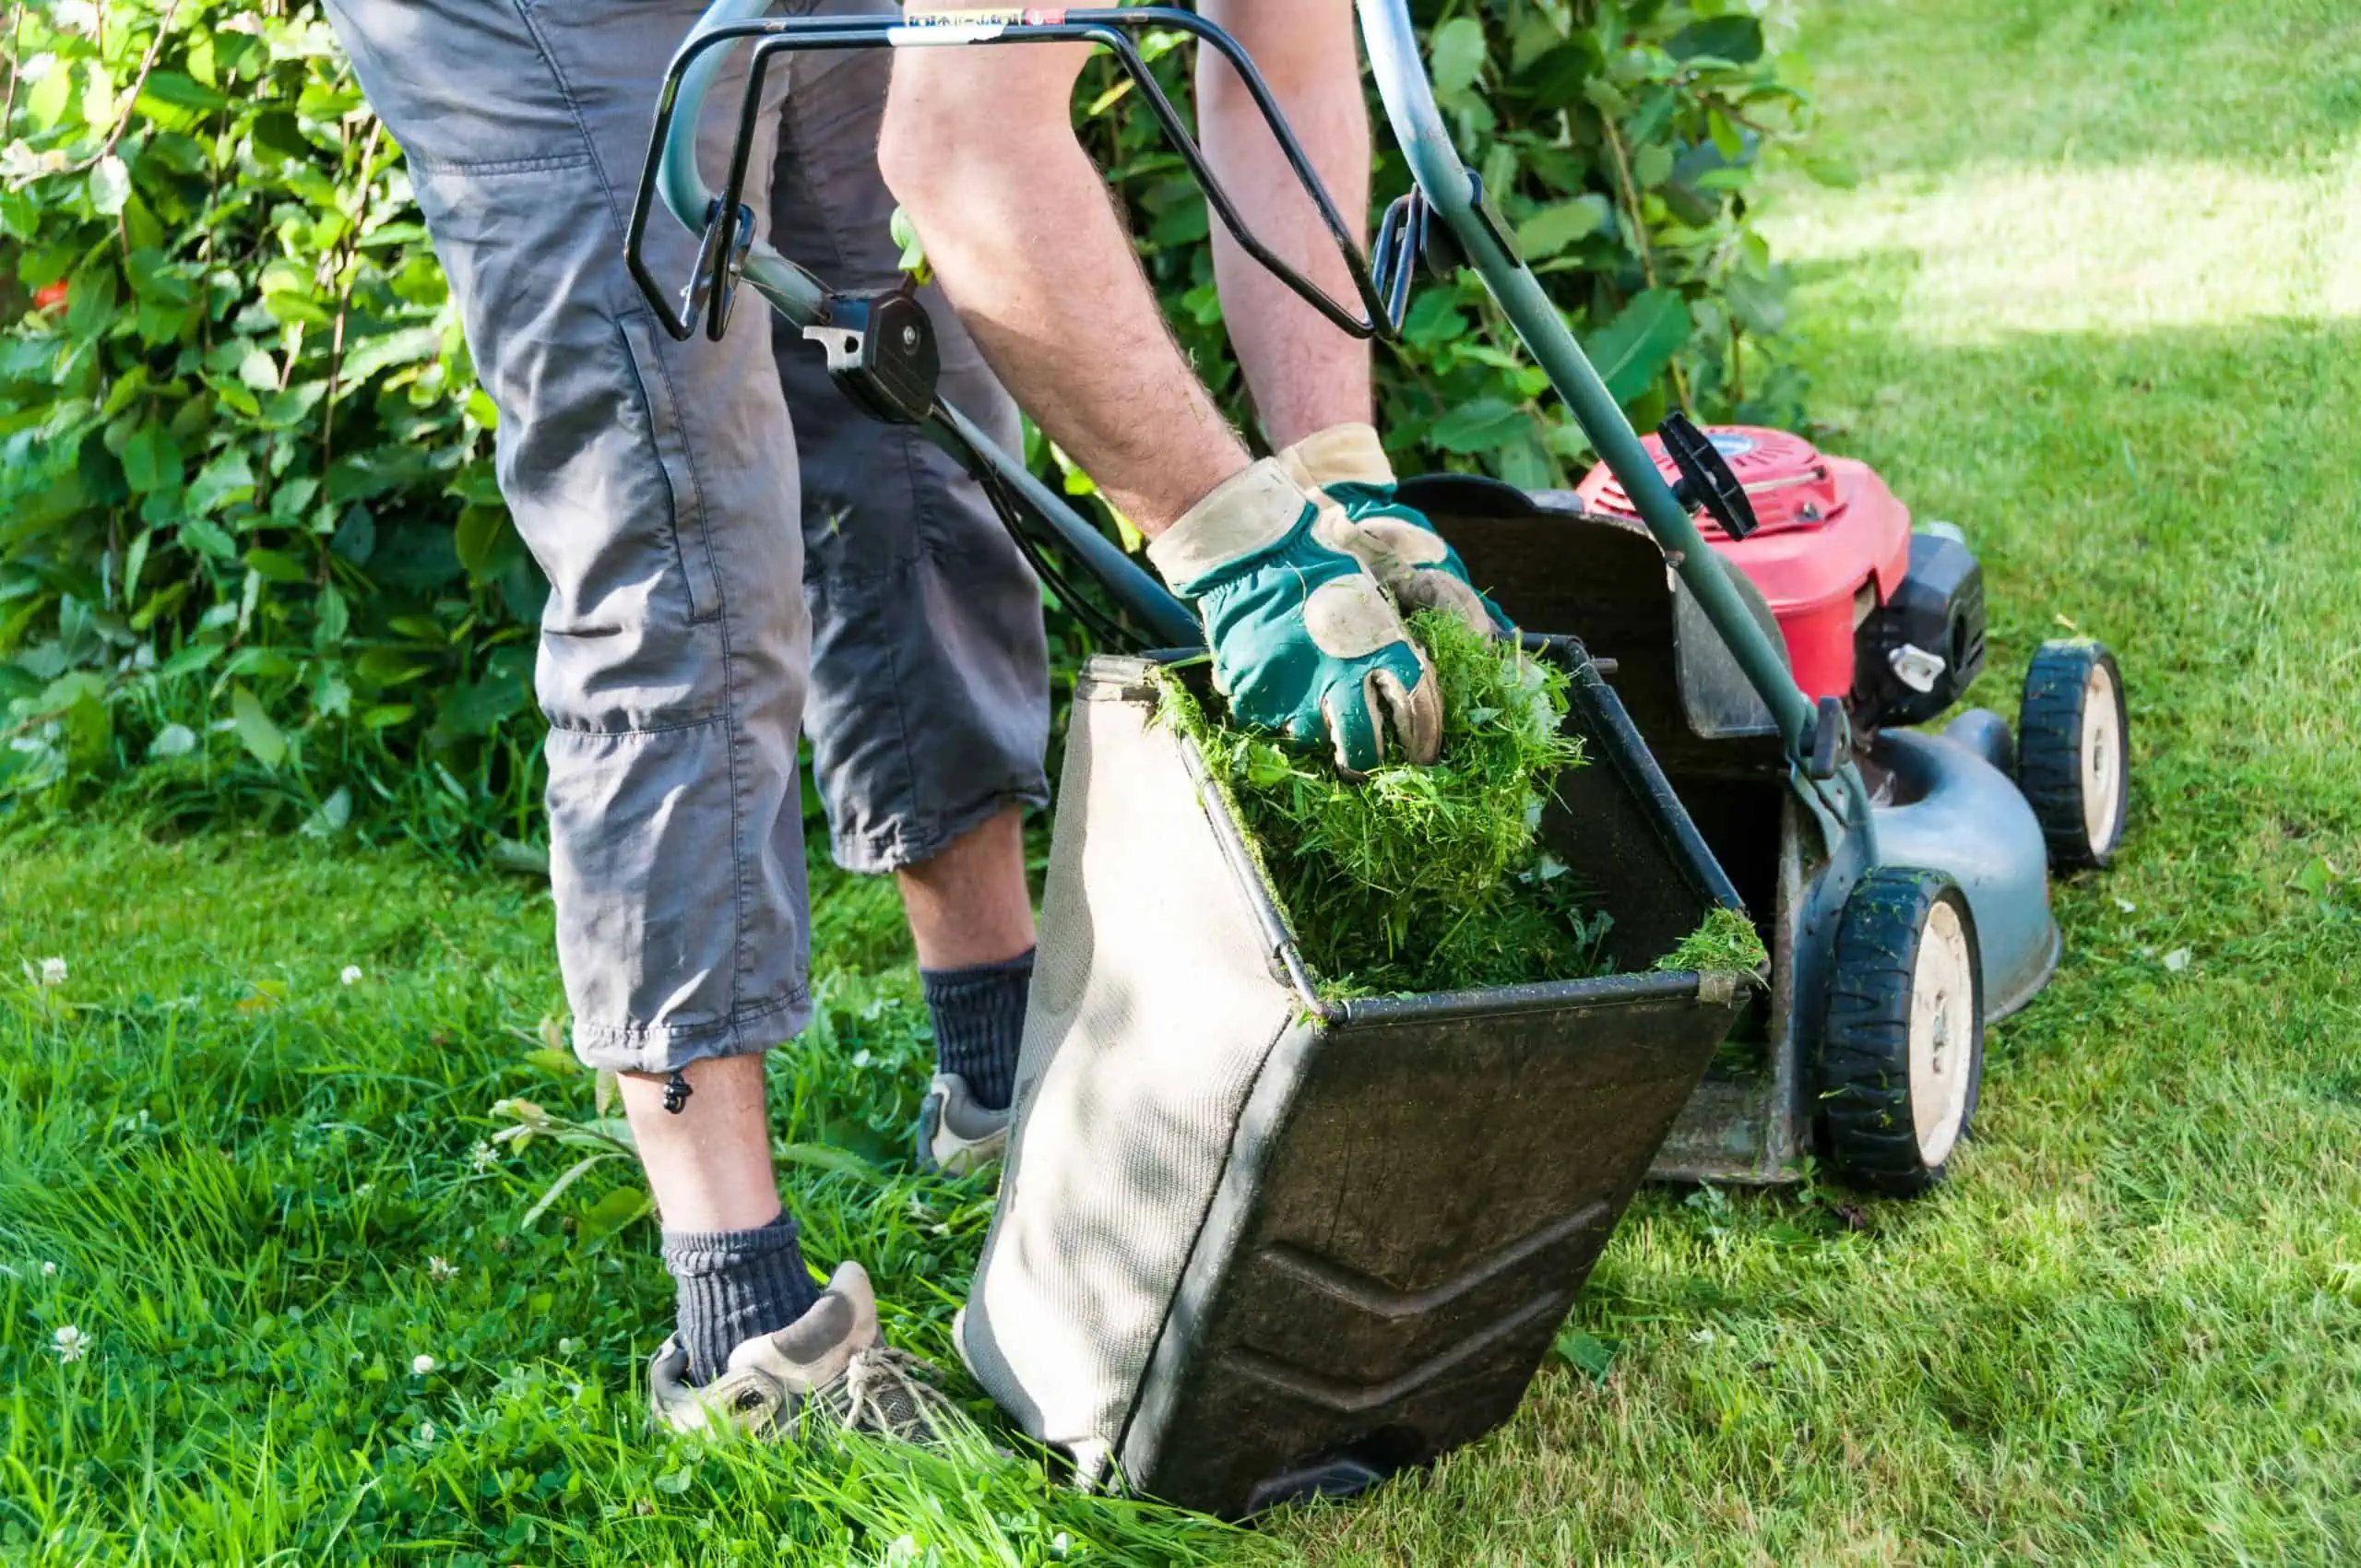 Effective weed control involves mulching, aeration, fertilizer, and other lawn care strategies